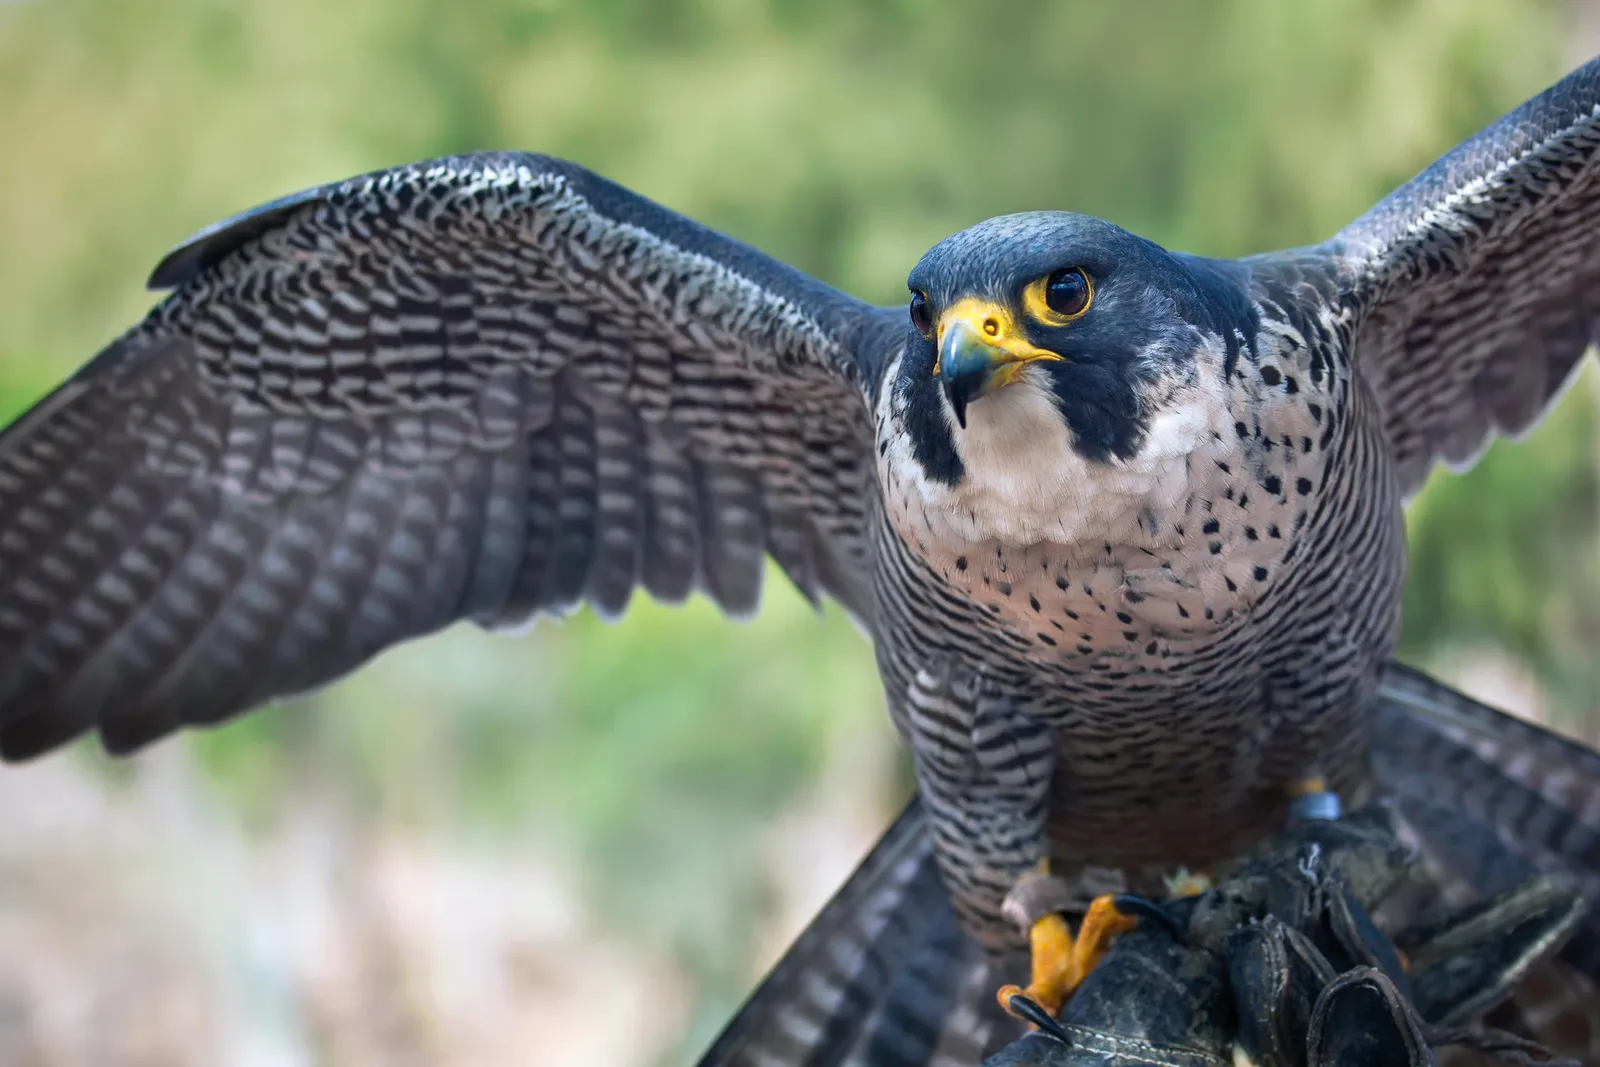 Ten Fun Facts About Falcons, the Birds | Science| Smithsonian Magazine